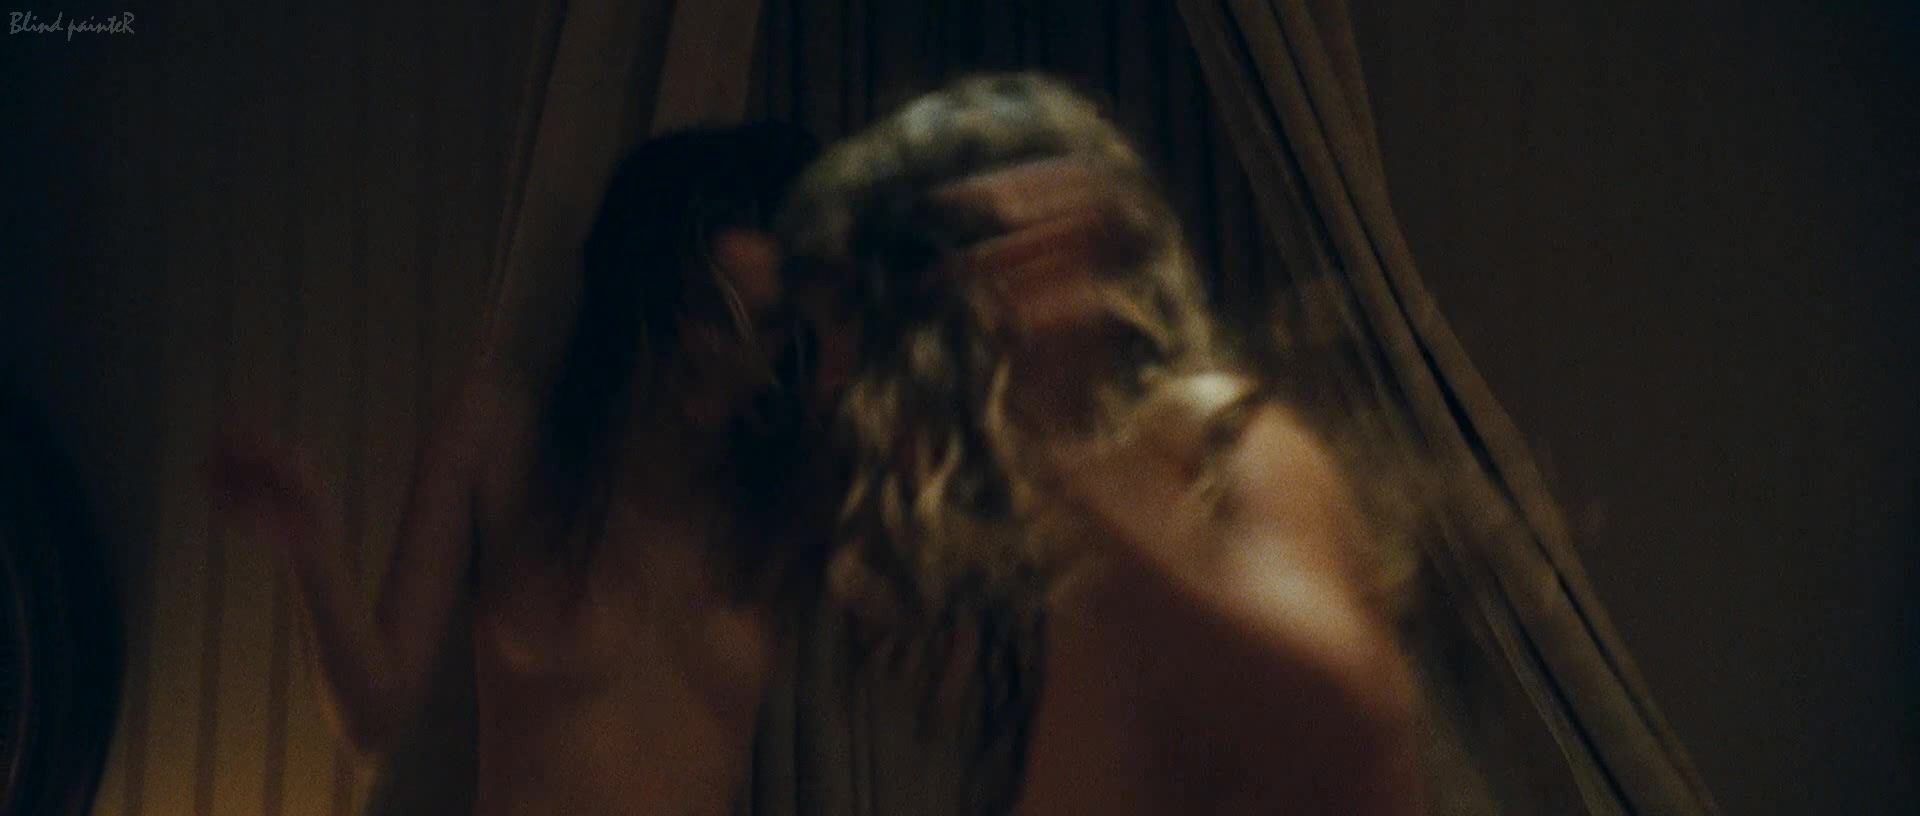 Gay Straight Sex video Camille Rowe - Our Day Will Come (Notre Jour Viendra) (2010) JackpotCityCasino